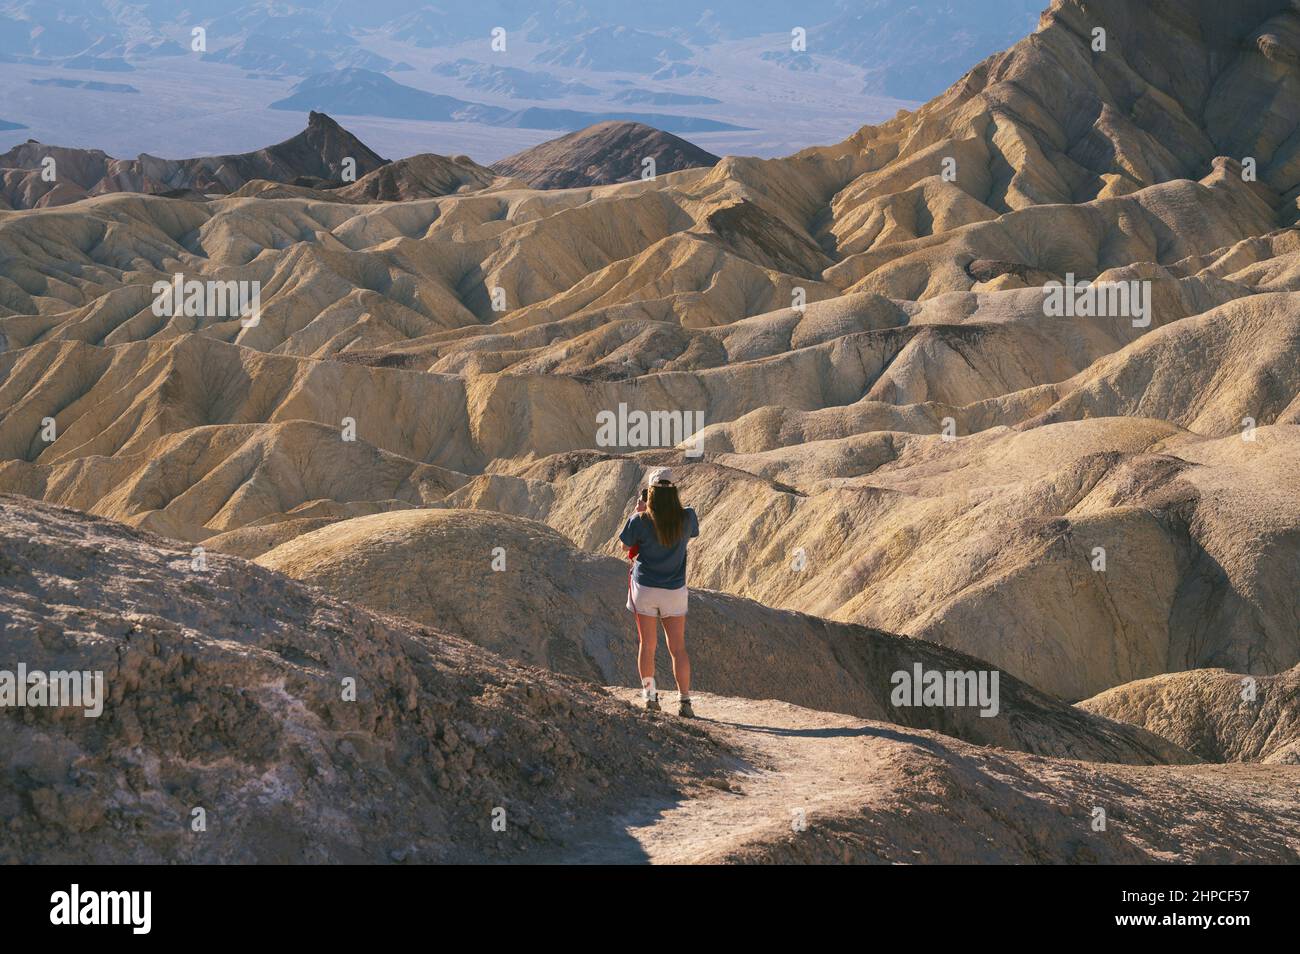 Female taking photo at Zabriskie Point in Death Valley National Park Stock Photo